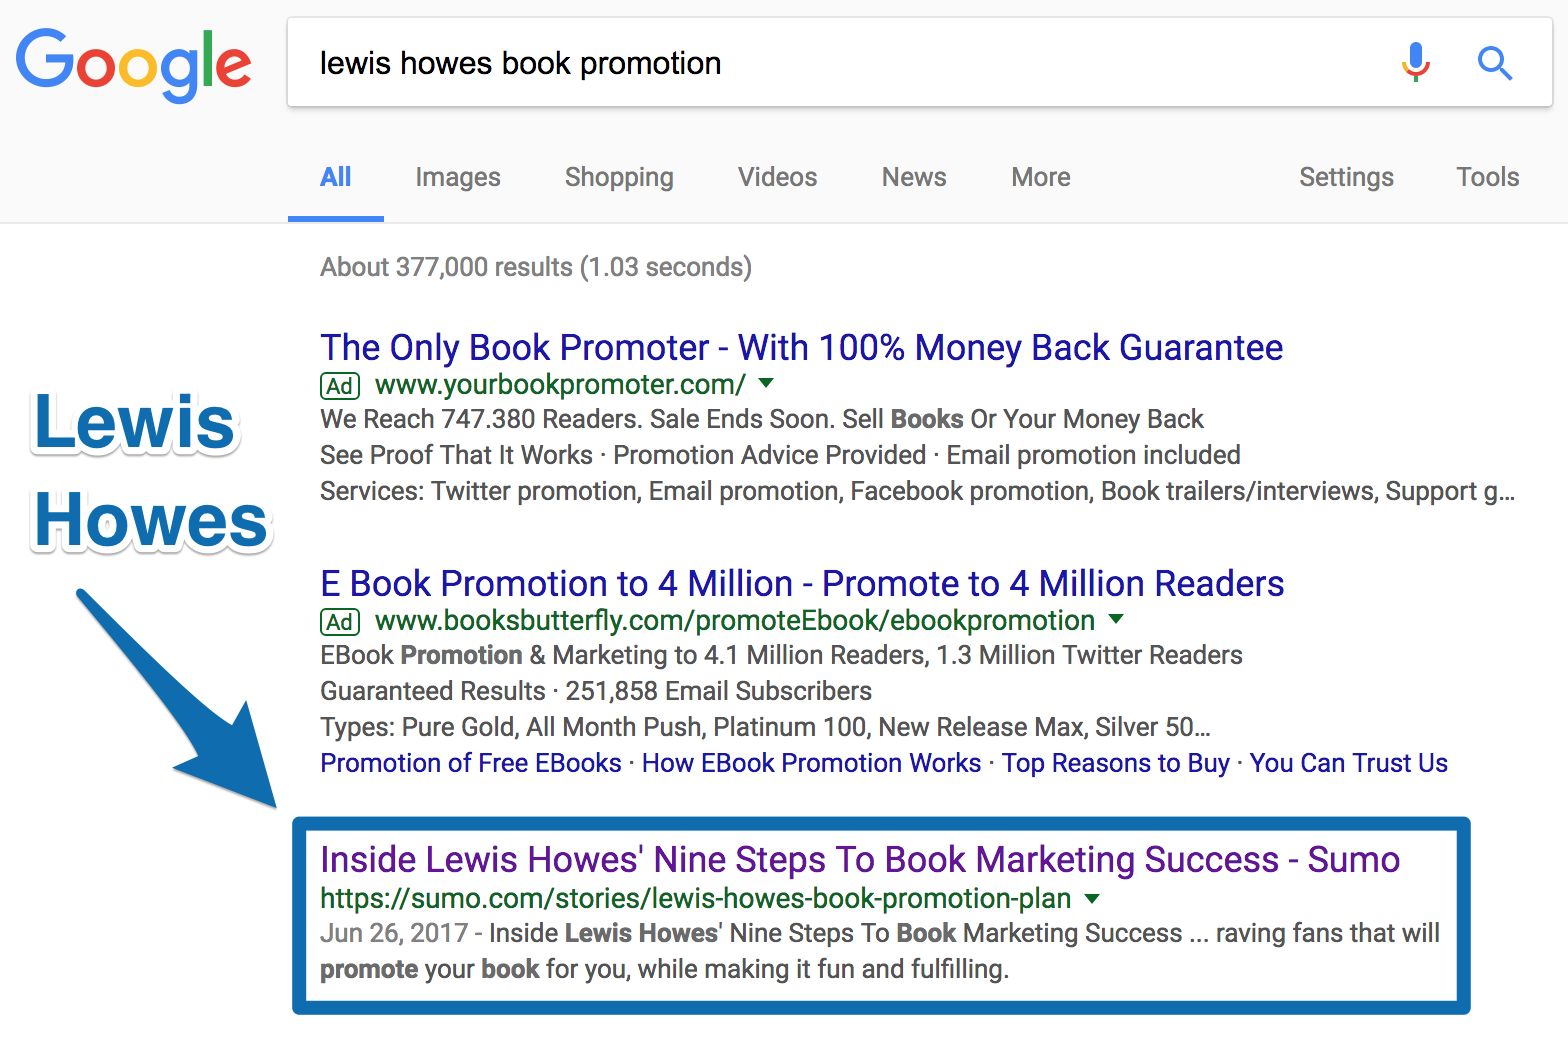 Screenshot showing the Sumo google search result for Lewis Howes book promotion